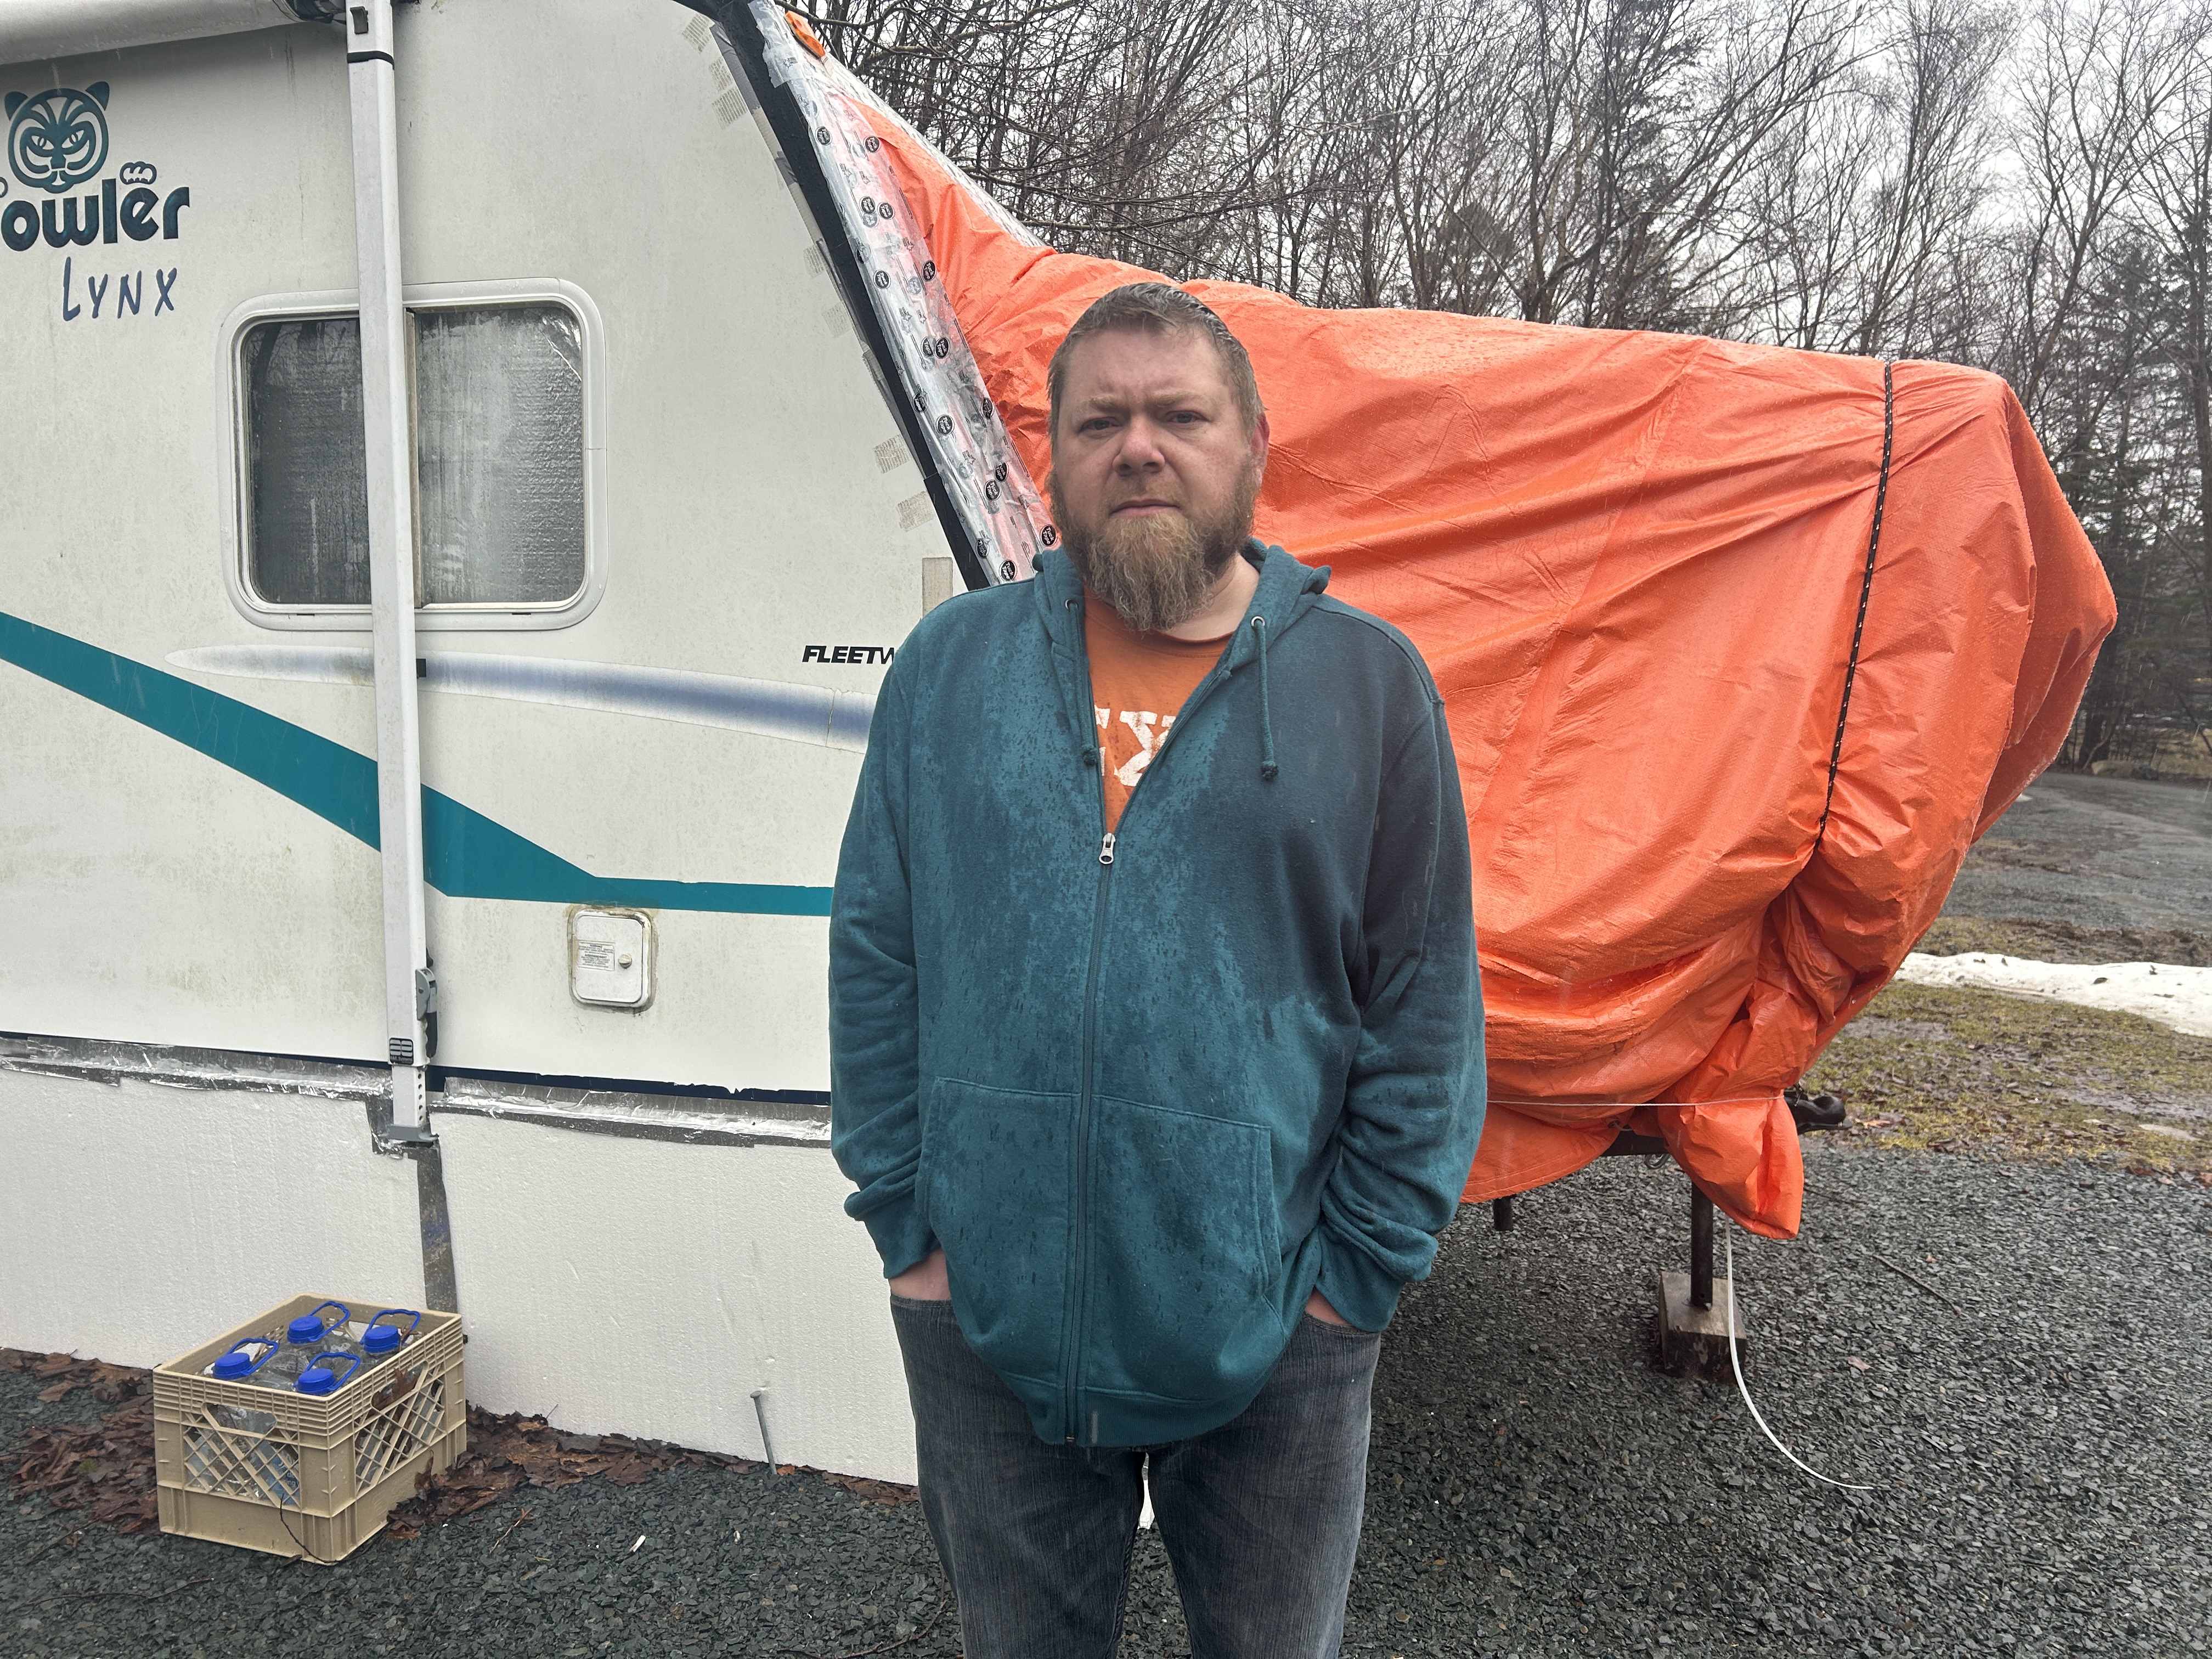 Campground resident in N.S. faces eviction and uncertainty as ‘short-term solution’ ends